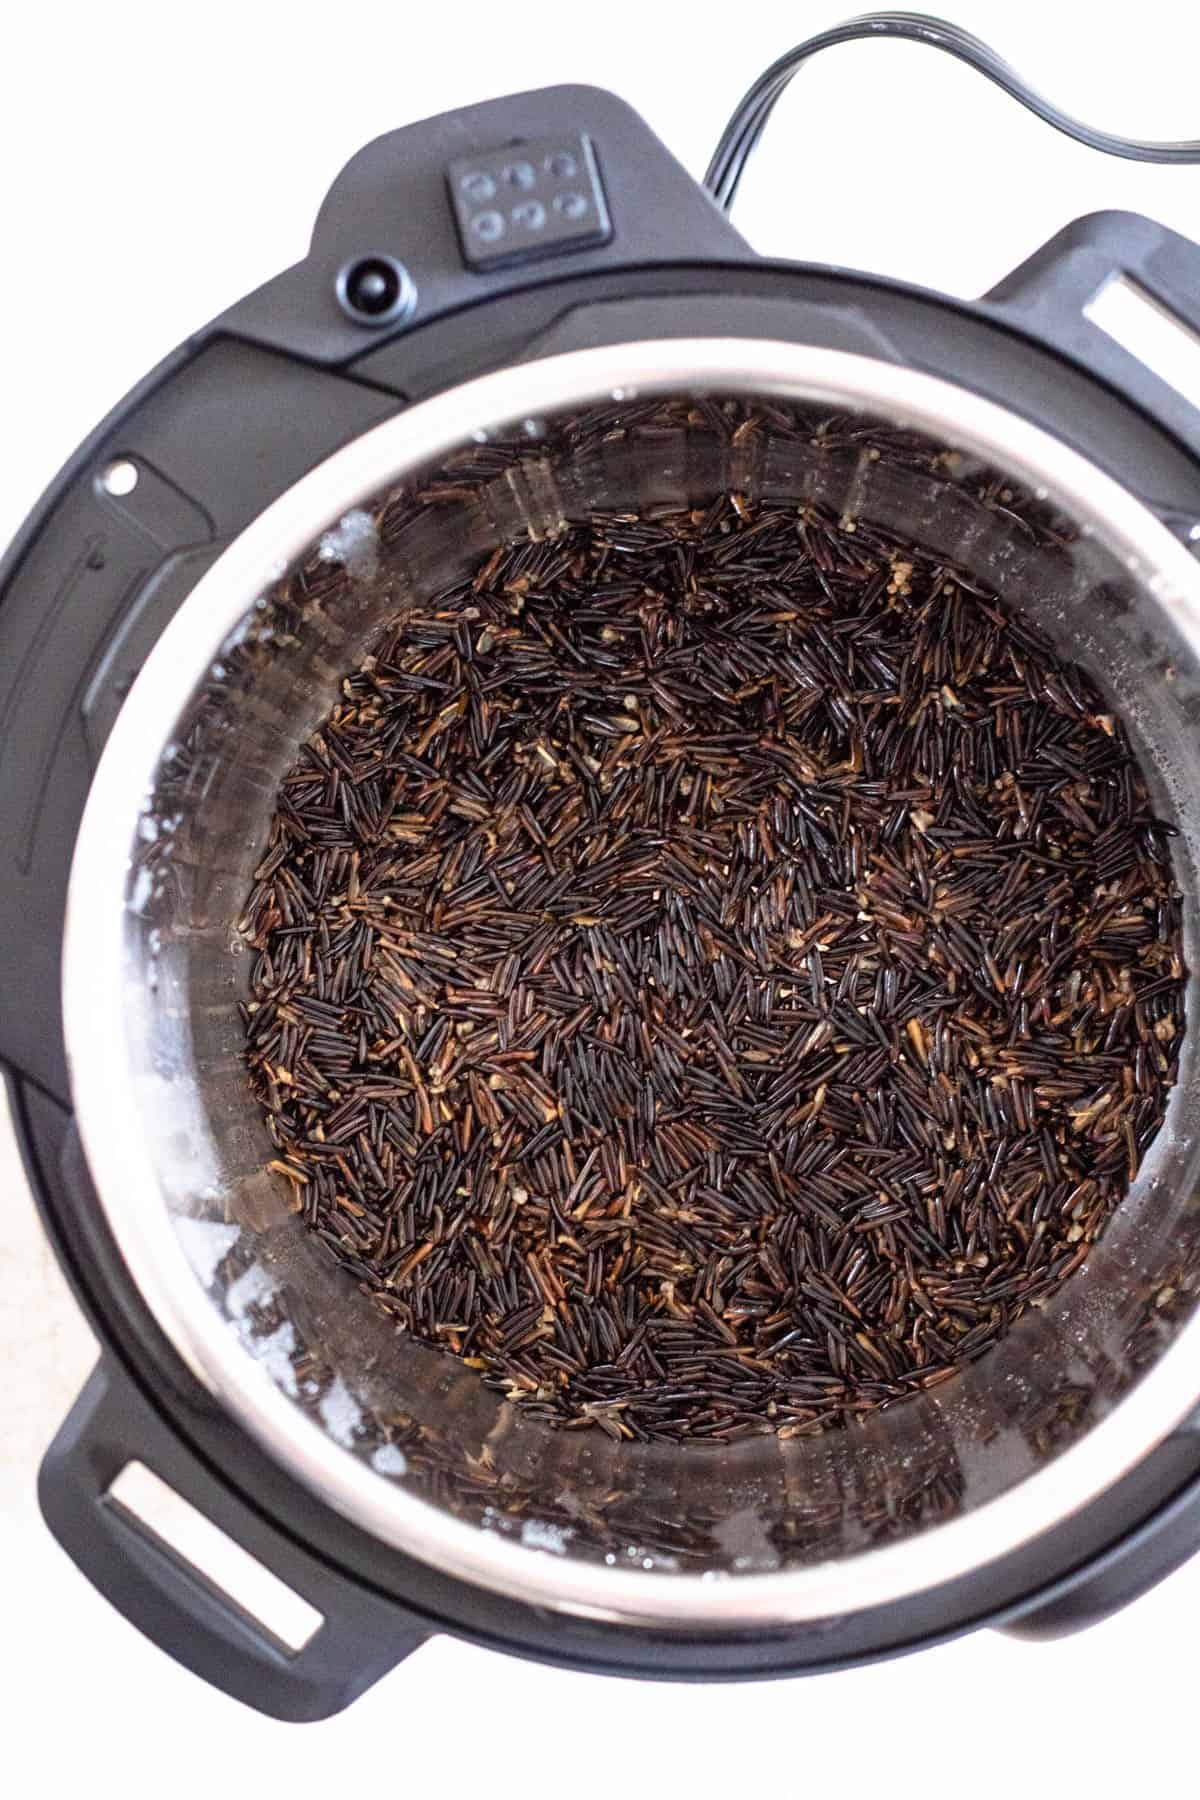 Top view of the wild rice in the instant pot.